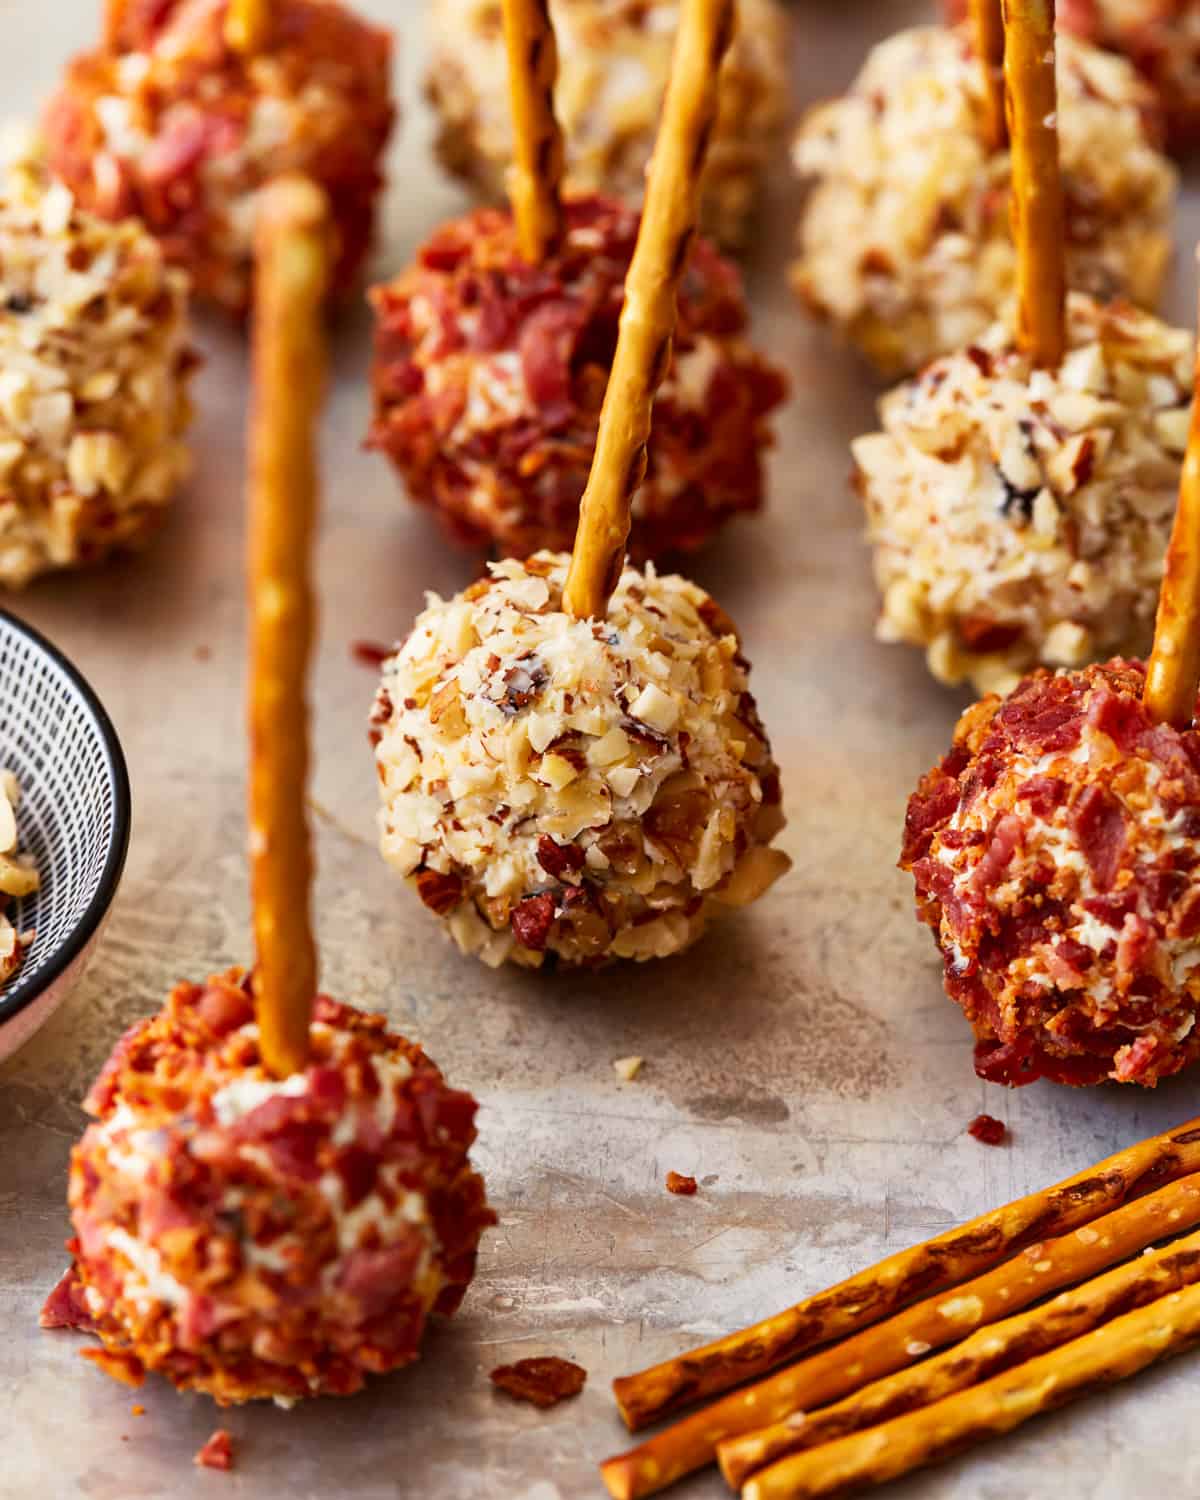 mini cheese ball bites with bacon and nuts on pretzel sticks.